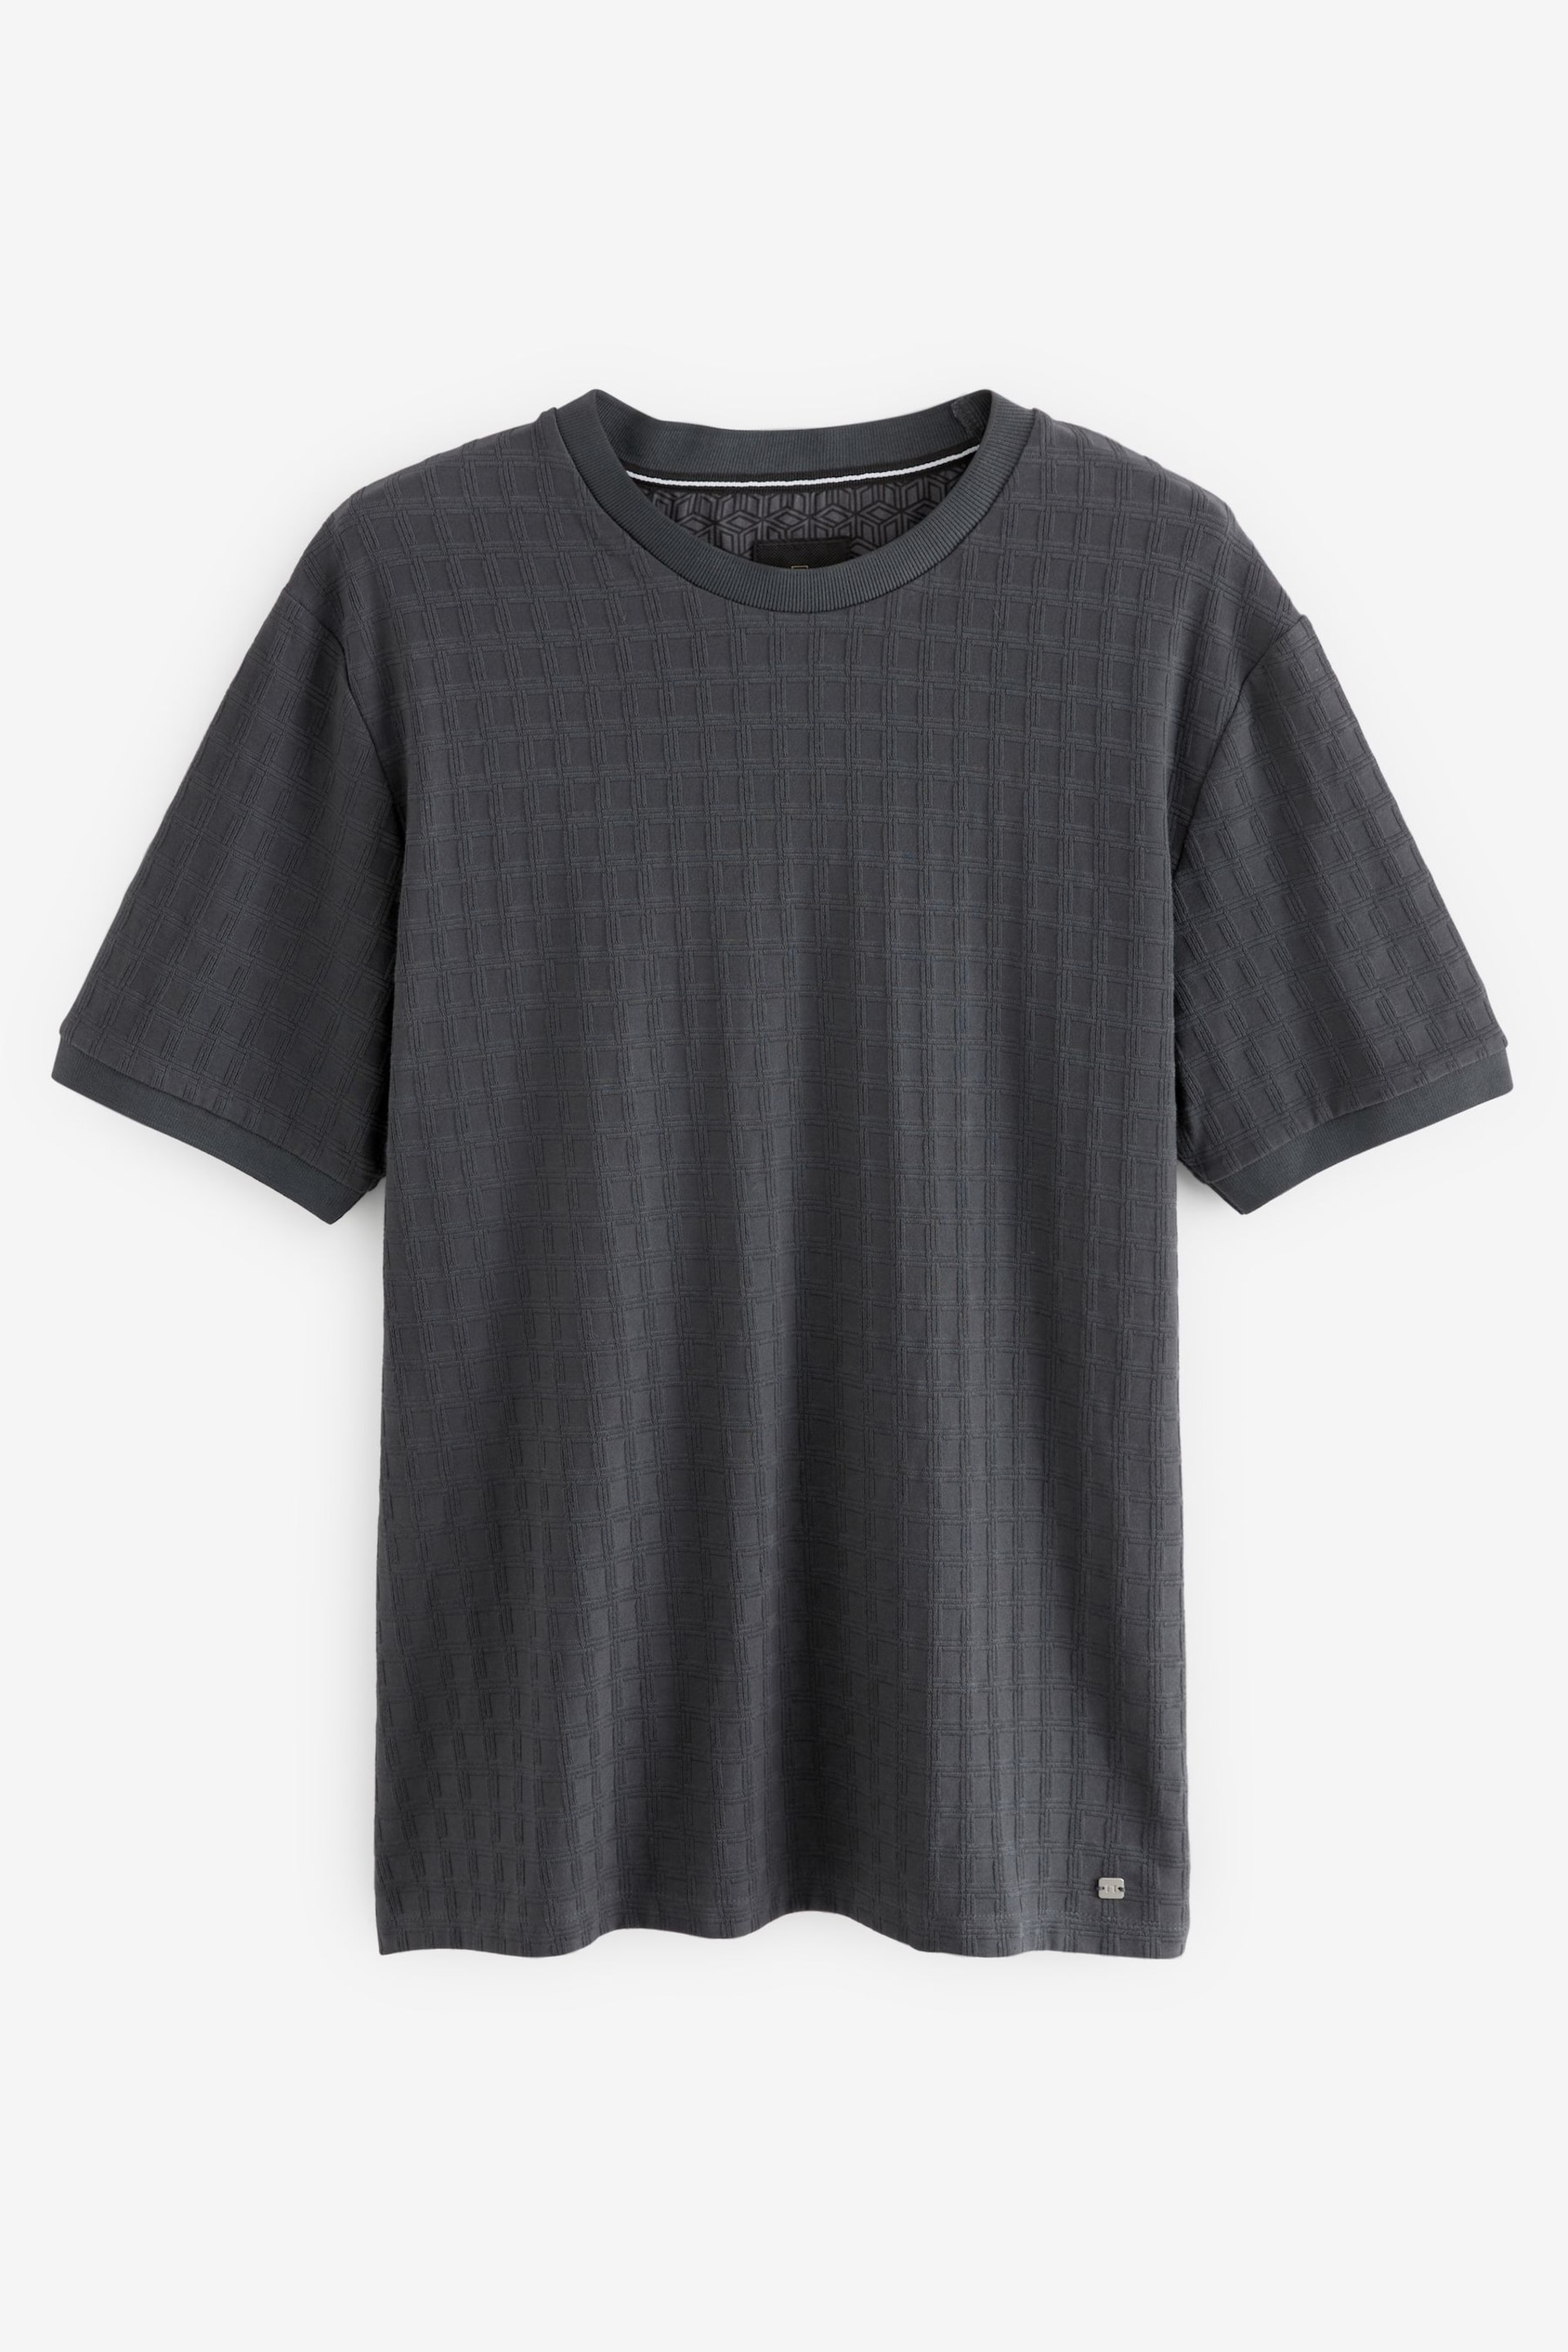 Charcoal Grey Texture T-Shirt - Image 6 of 8